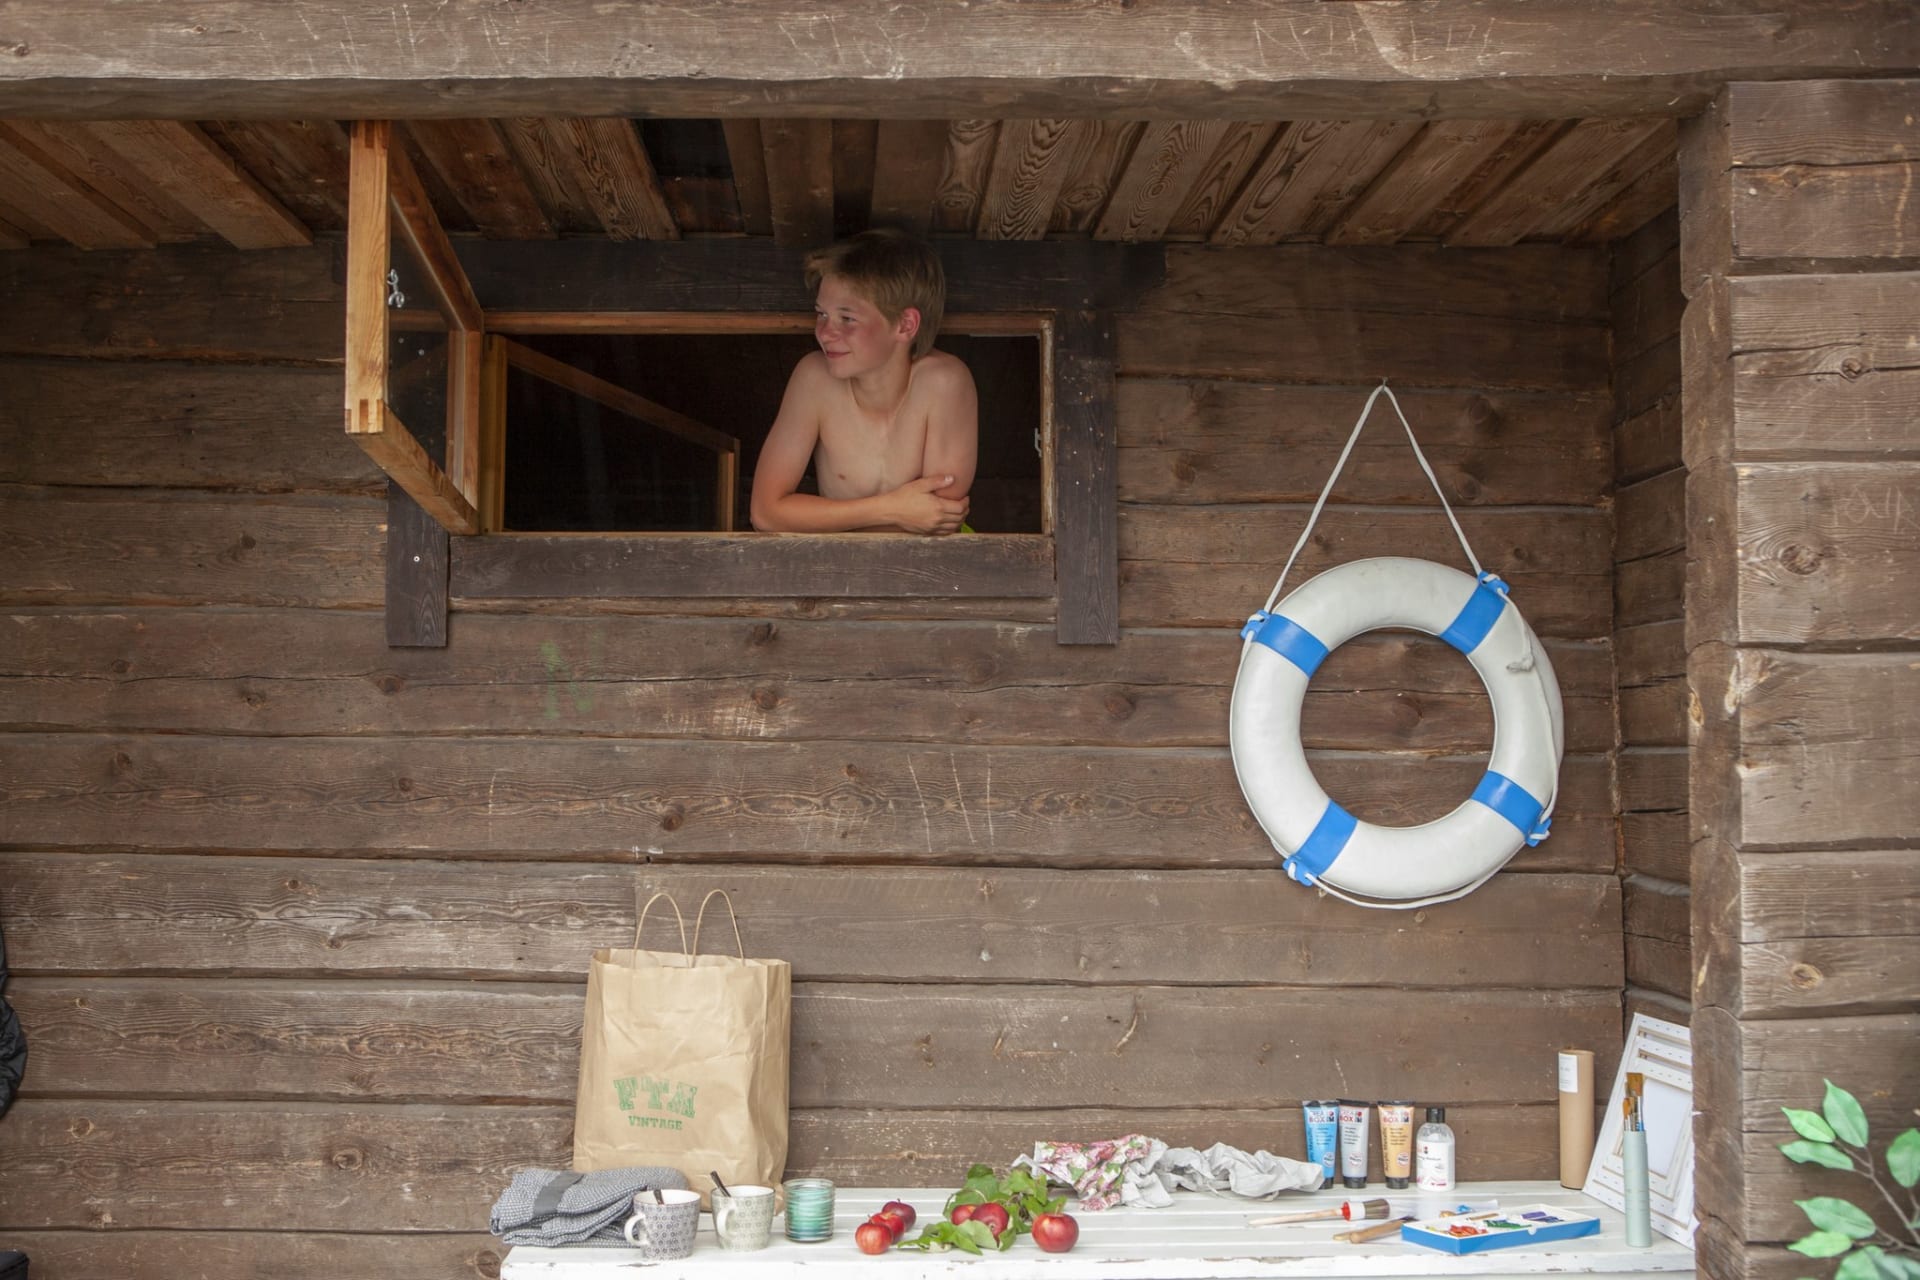 A boy is watching out from the sauna window.